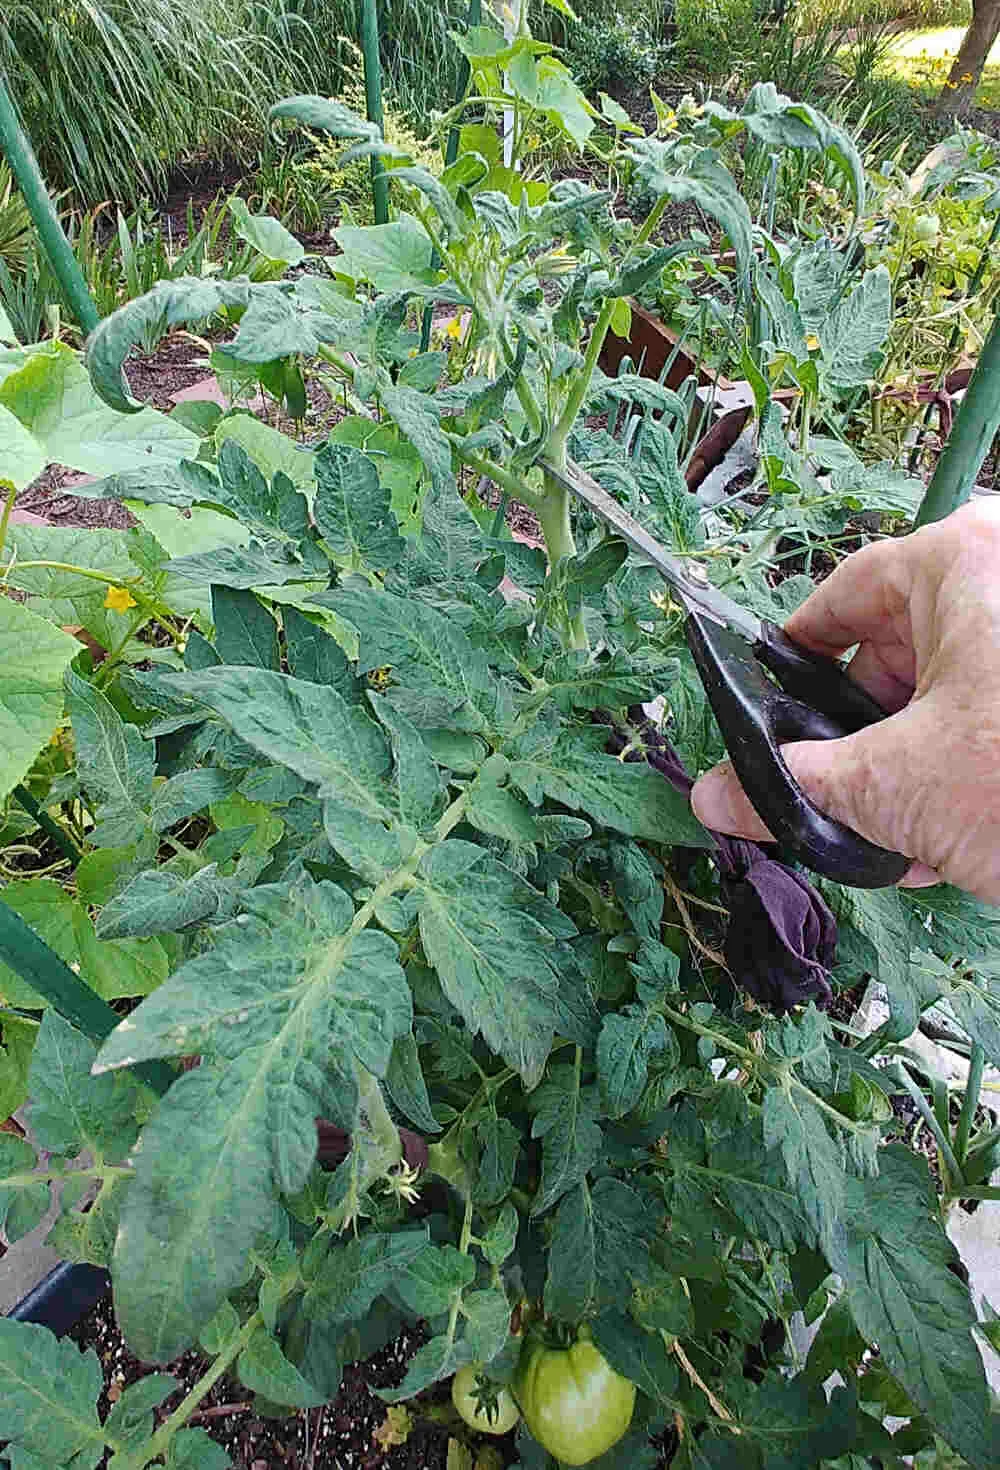 Topping a tomato plant to encourage it to ripen the green tomatoes.